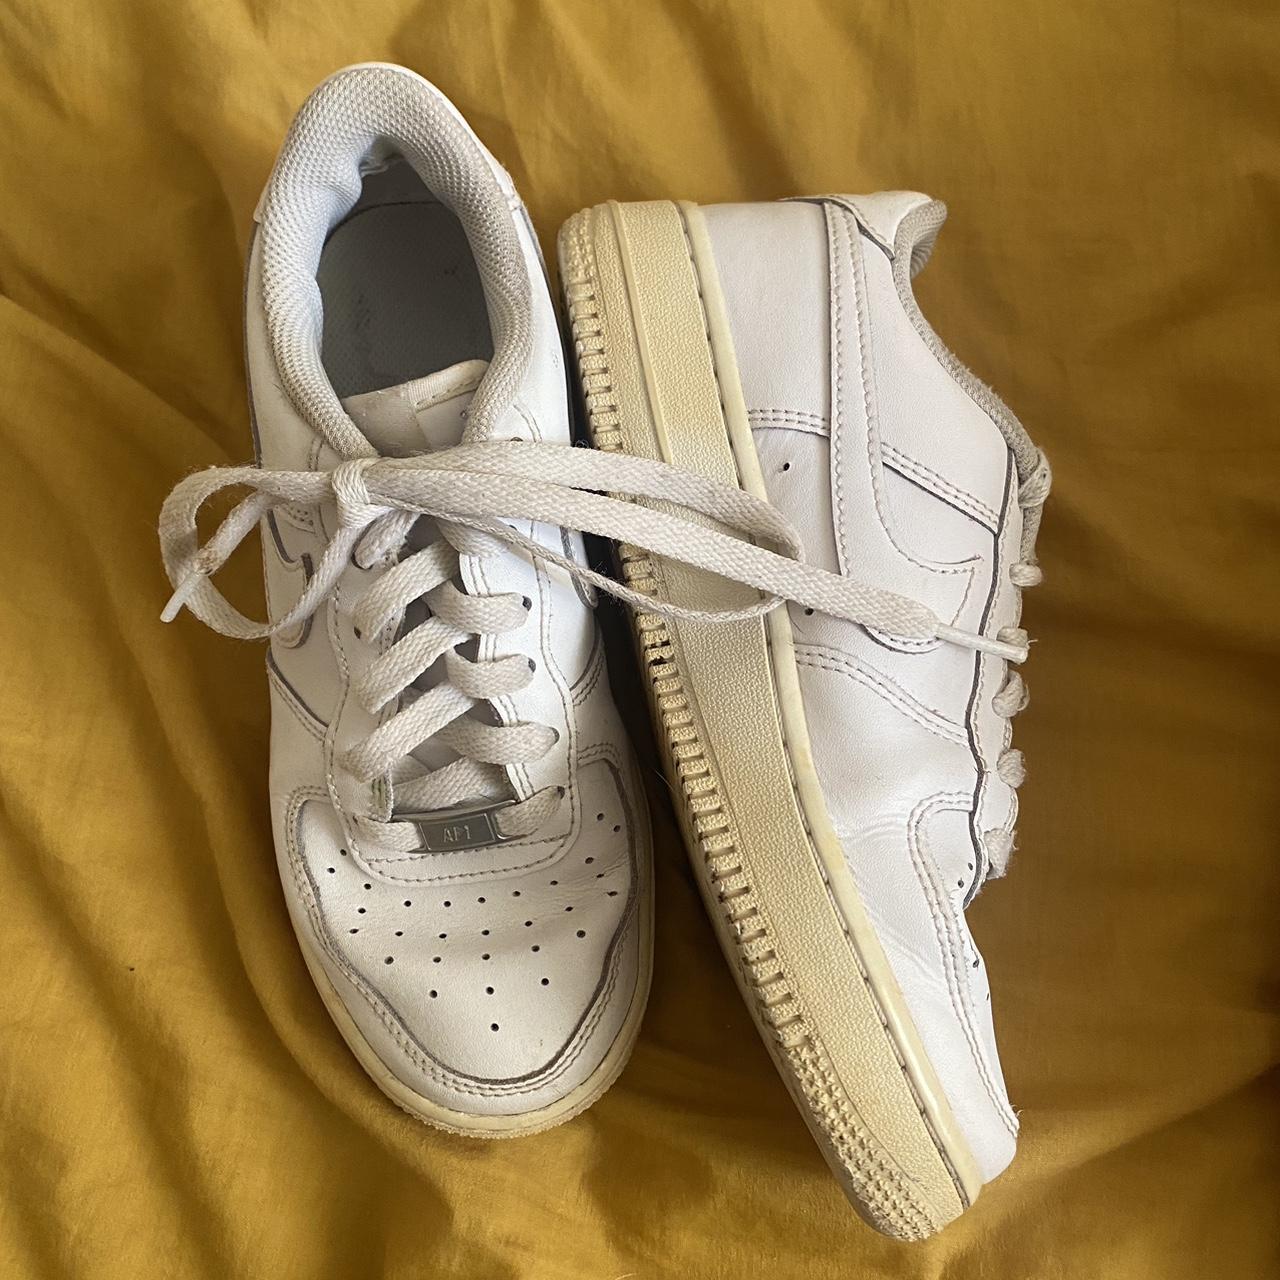 Really good condition air force 1s #airforce1 #nike... - Depop